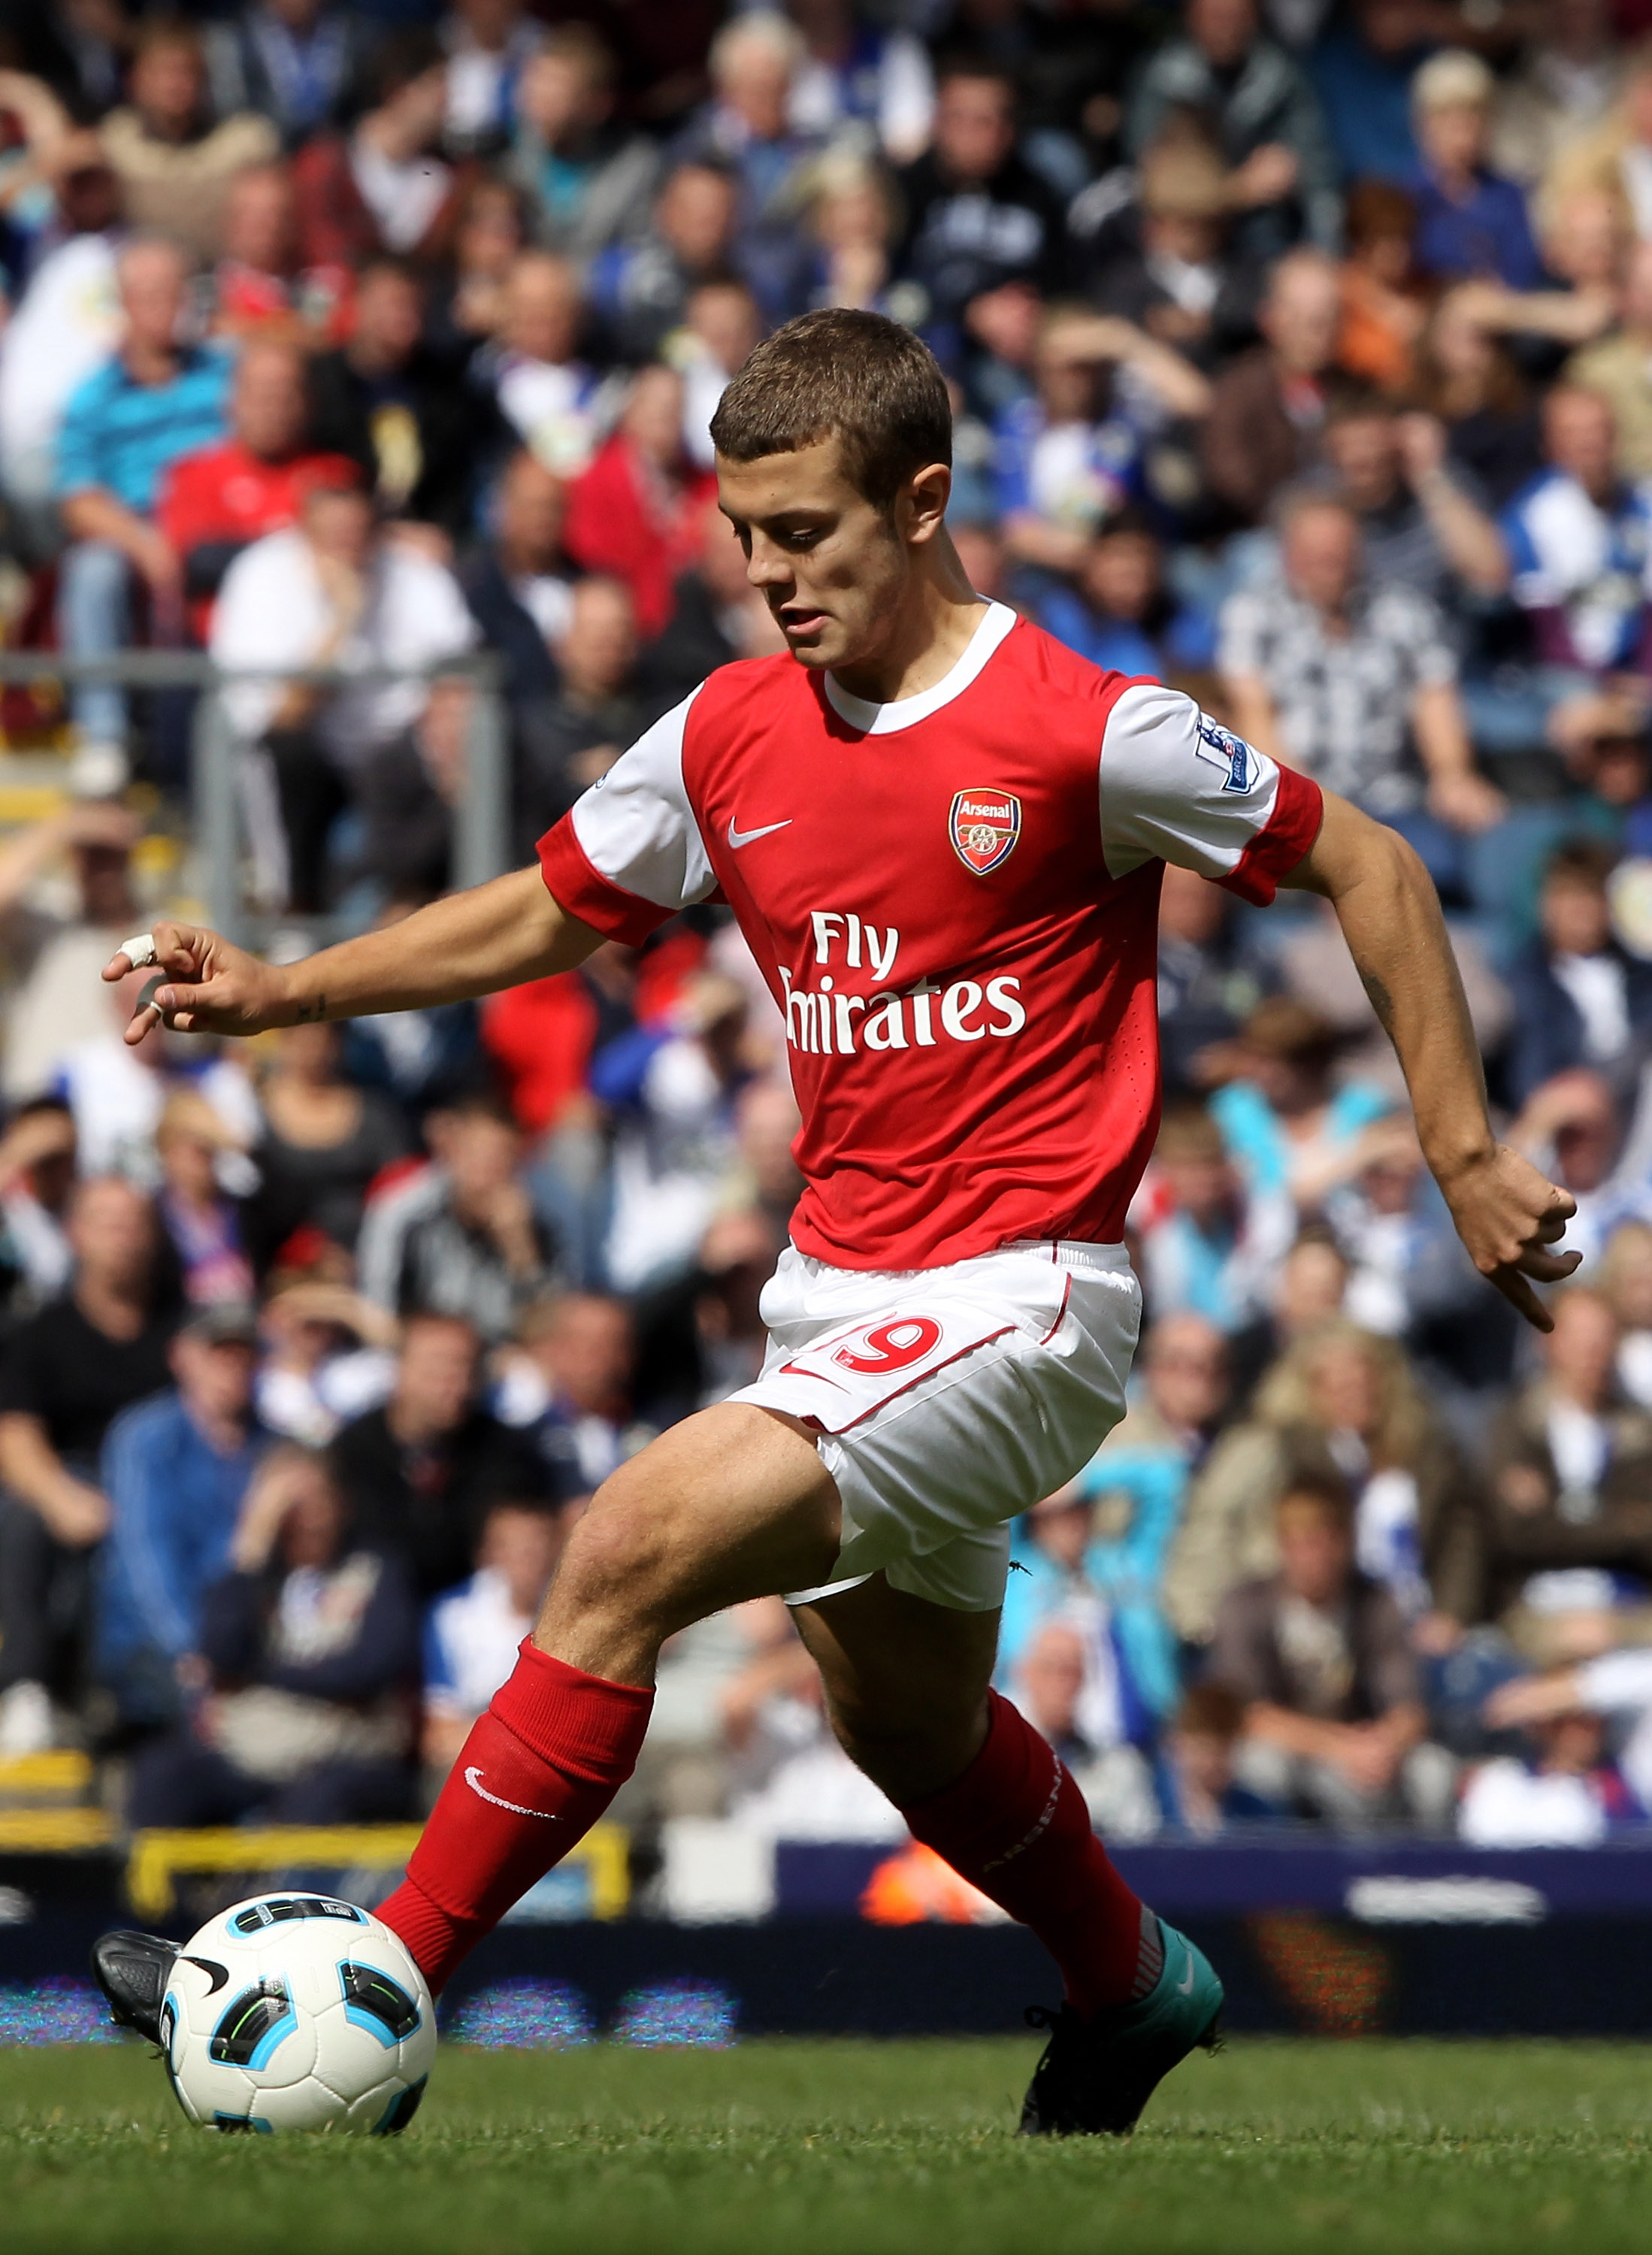 BLACKBURN, ENGLAND - AUGUST 28:  Jack Wilshere of Arsenal in action during the Barclays Premier League match between Blackburn Rovers and Arsenal at Ewood Park on August 28, 2010 in Blackburn, England.  (Photo by Clive Brunskill/Getty Images)